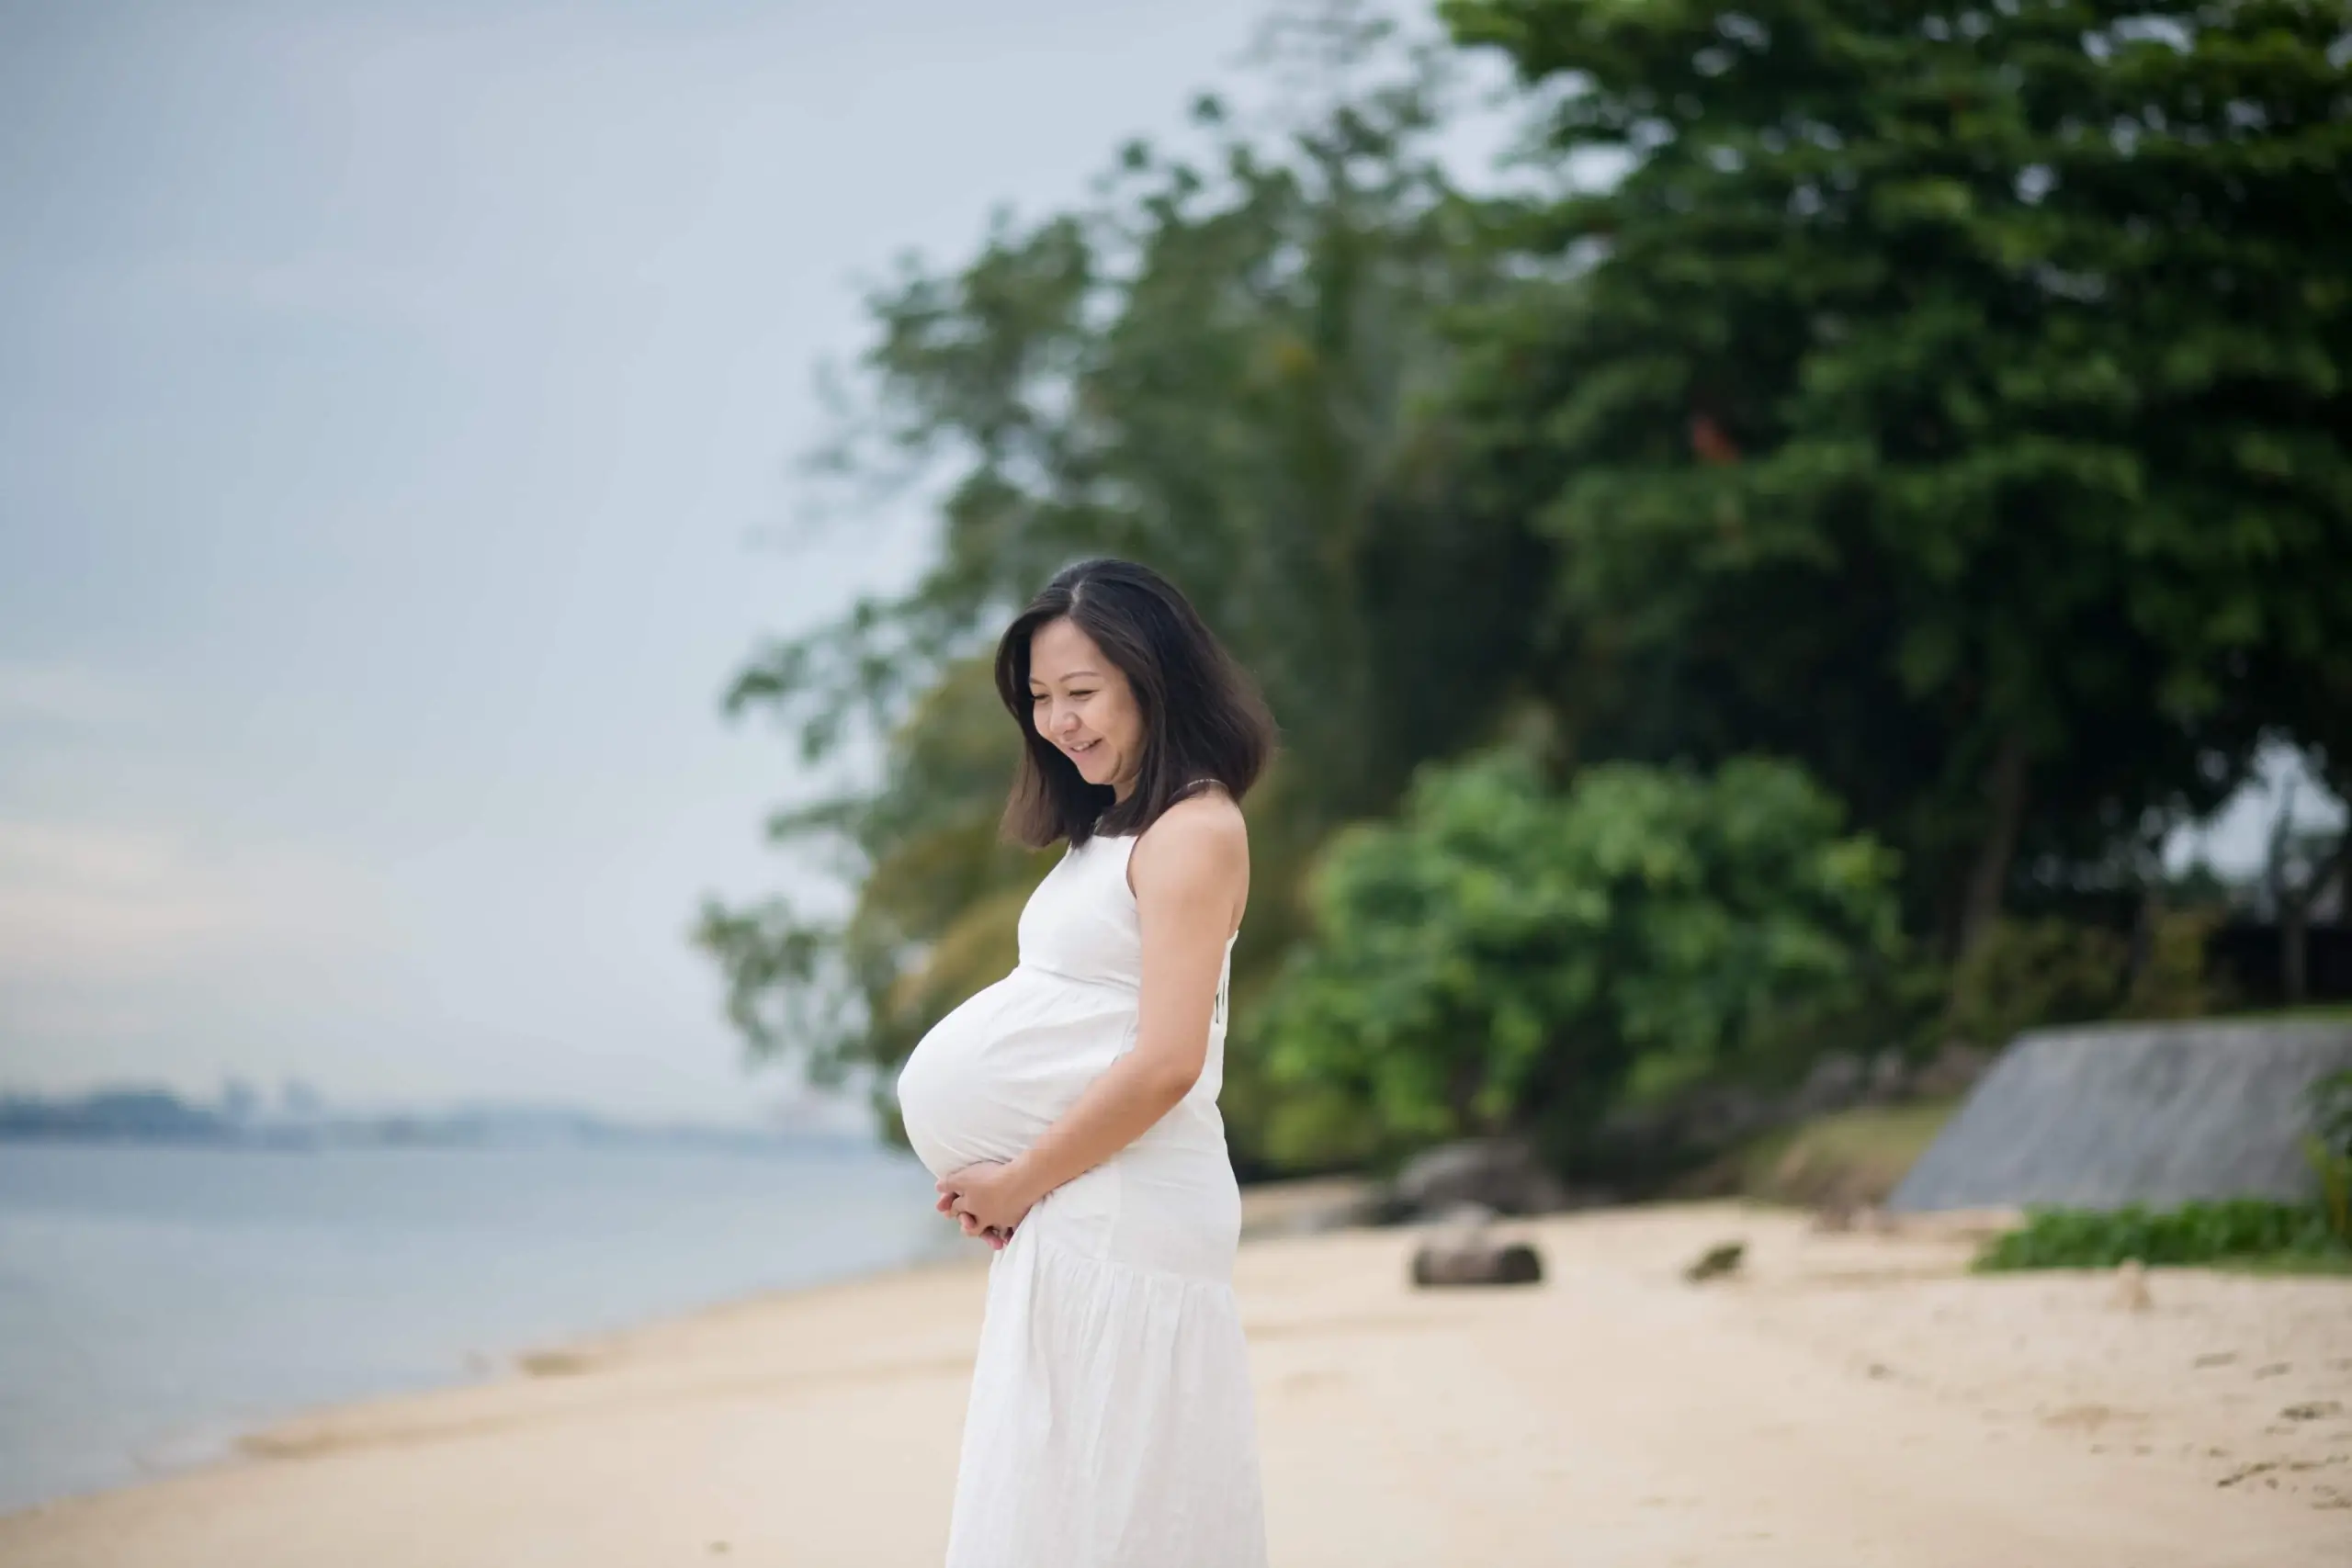 Outdoor Pregnancy Family Photoshoot in Singapore